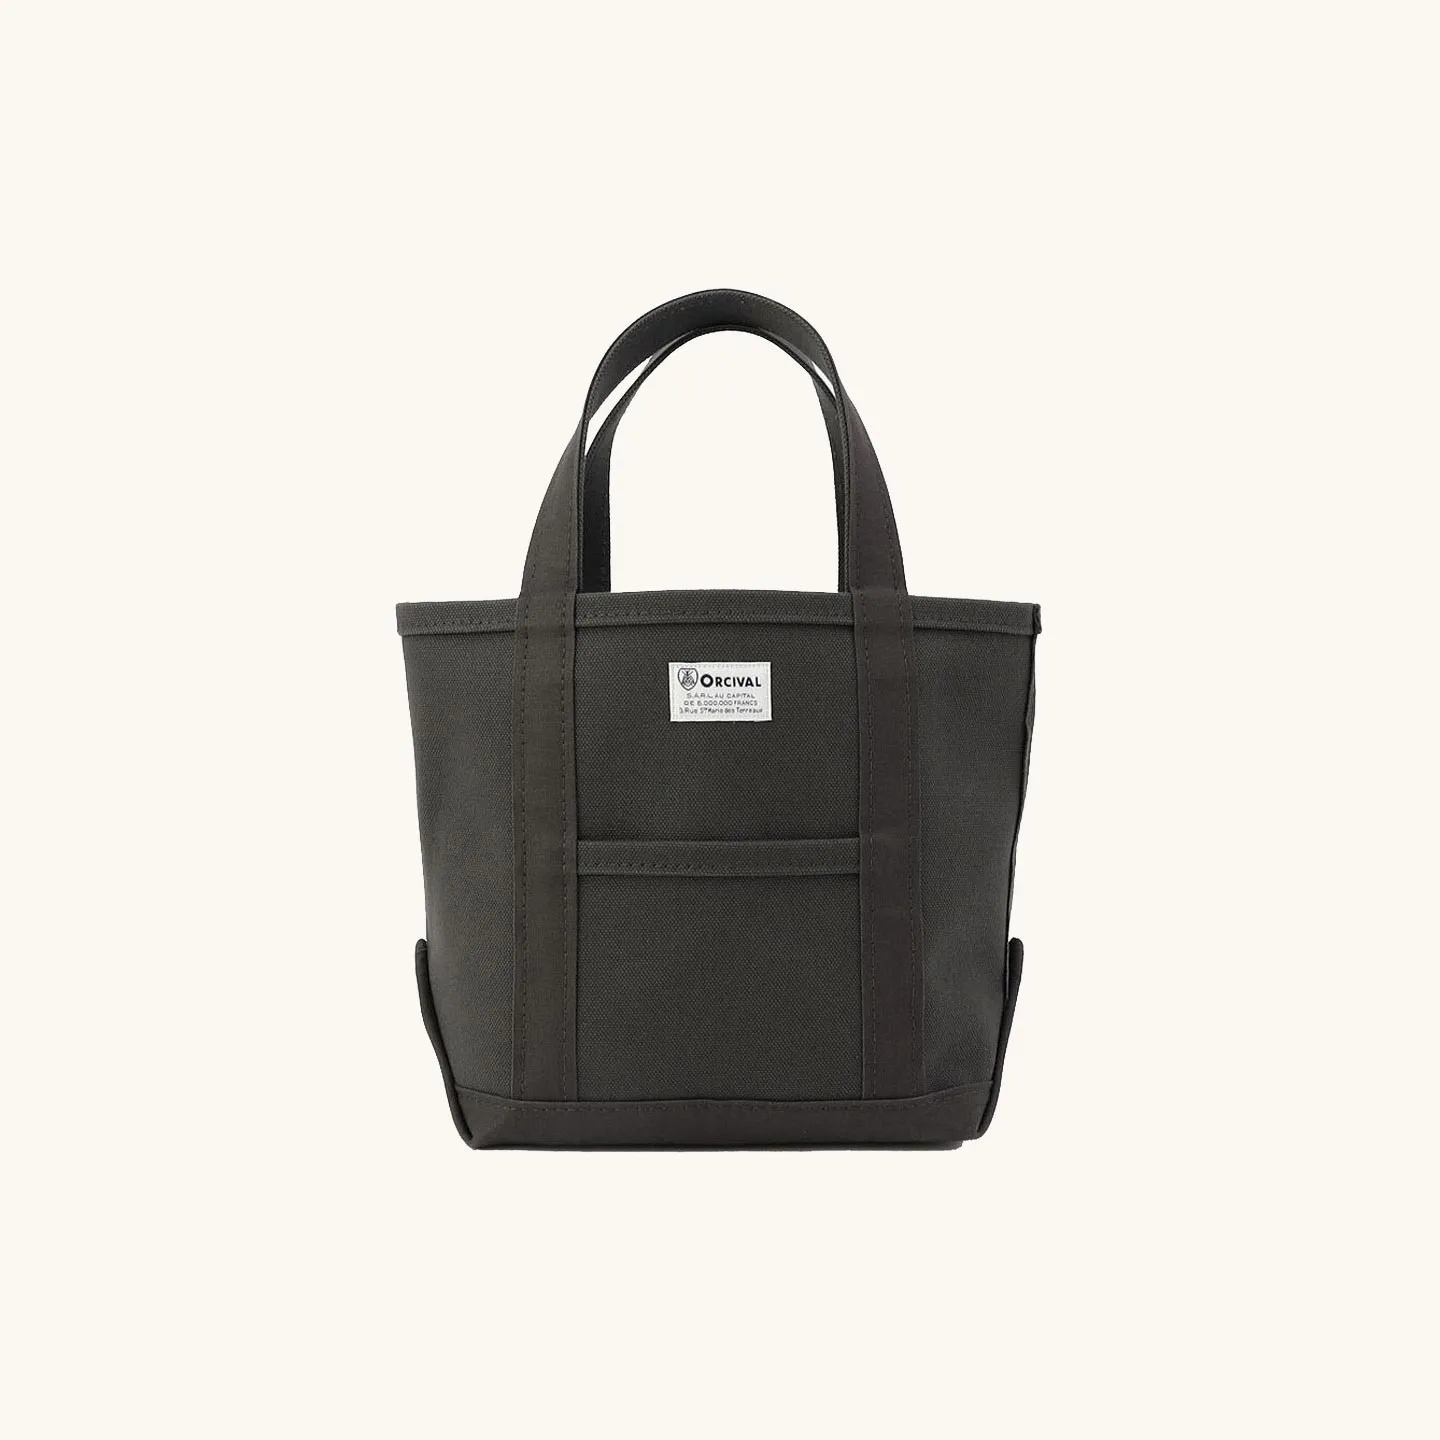 The charcoal tote-bag by Orcival in small size Orcival